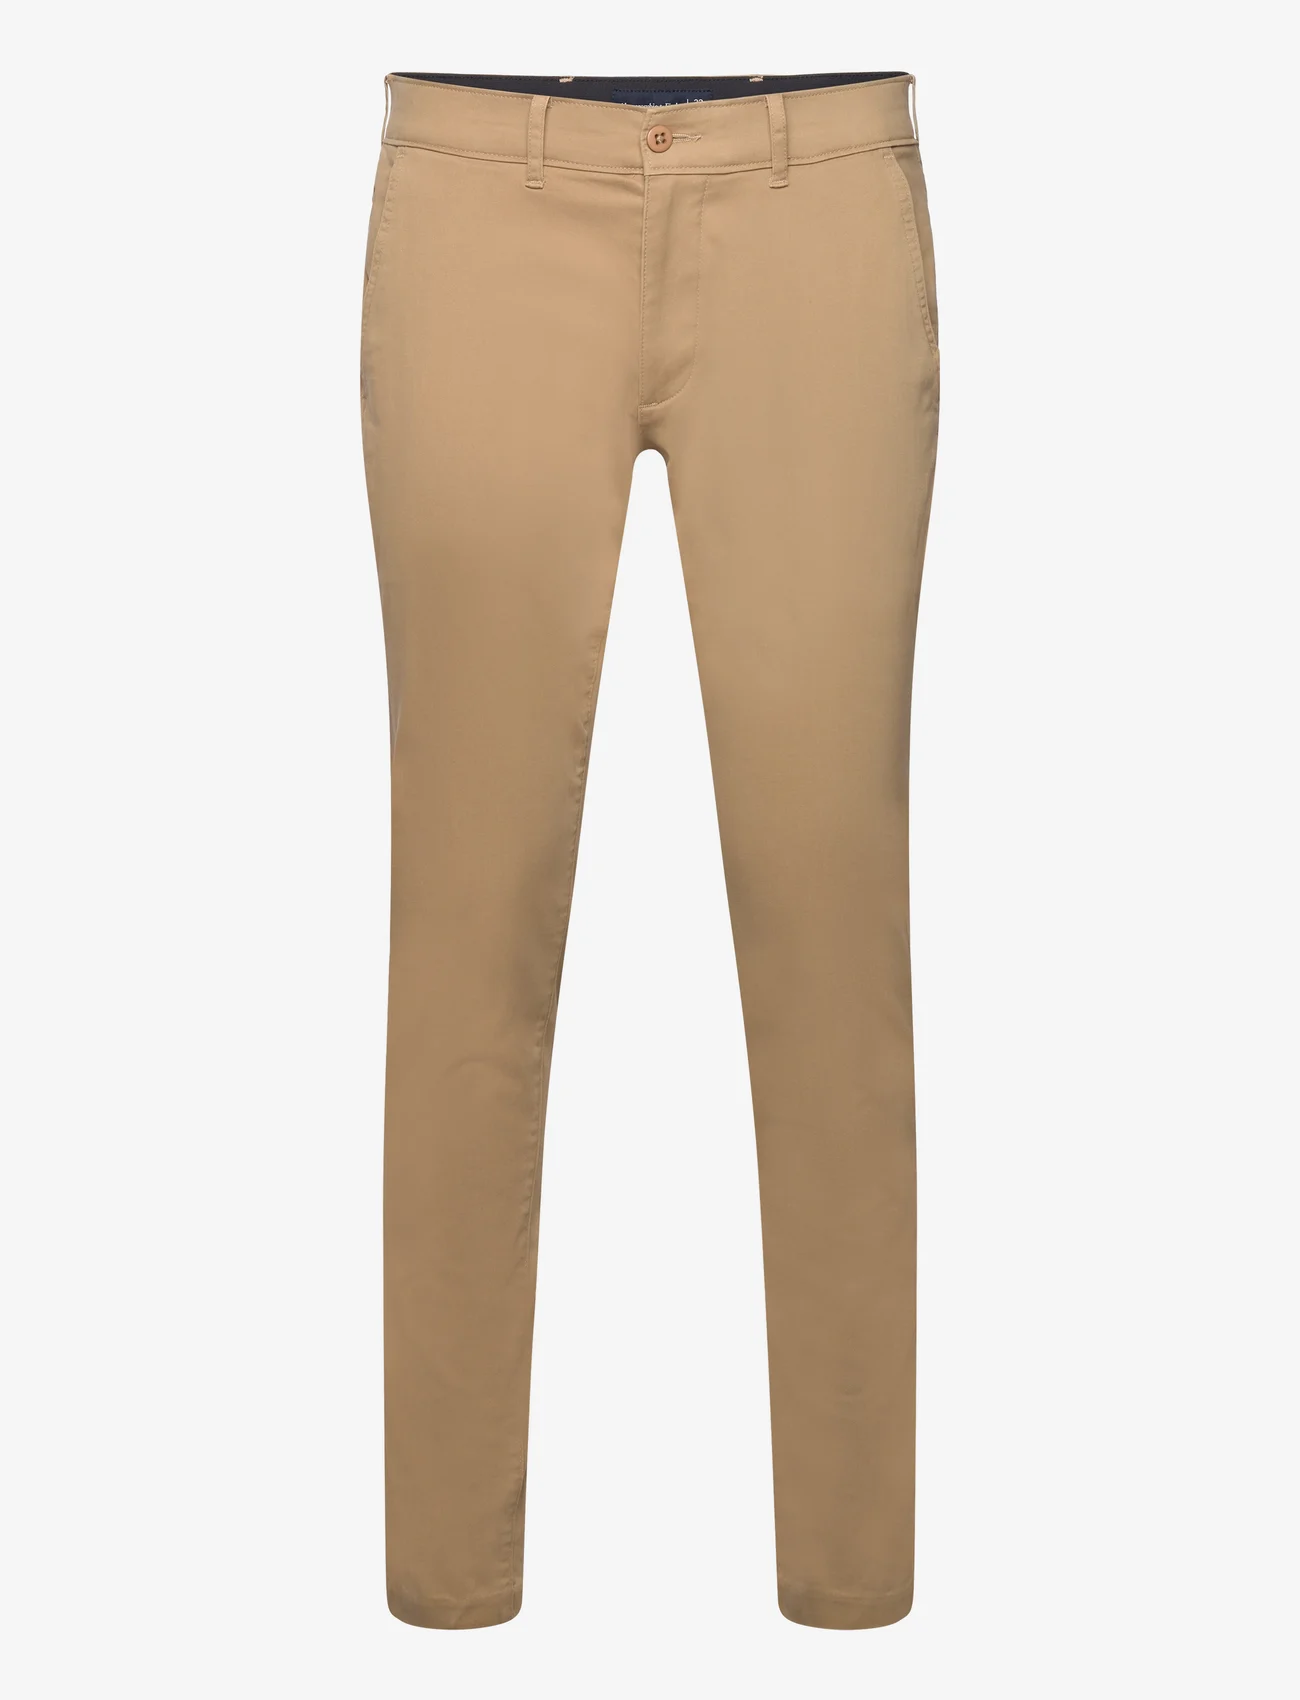 Abercrombie & Fitch - ANF MENS PANTS - chinos - kelp 475 - 0